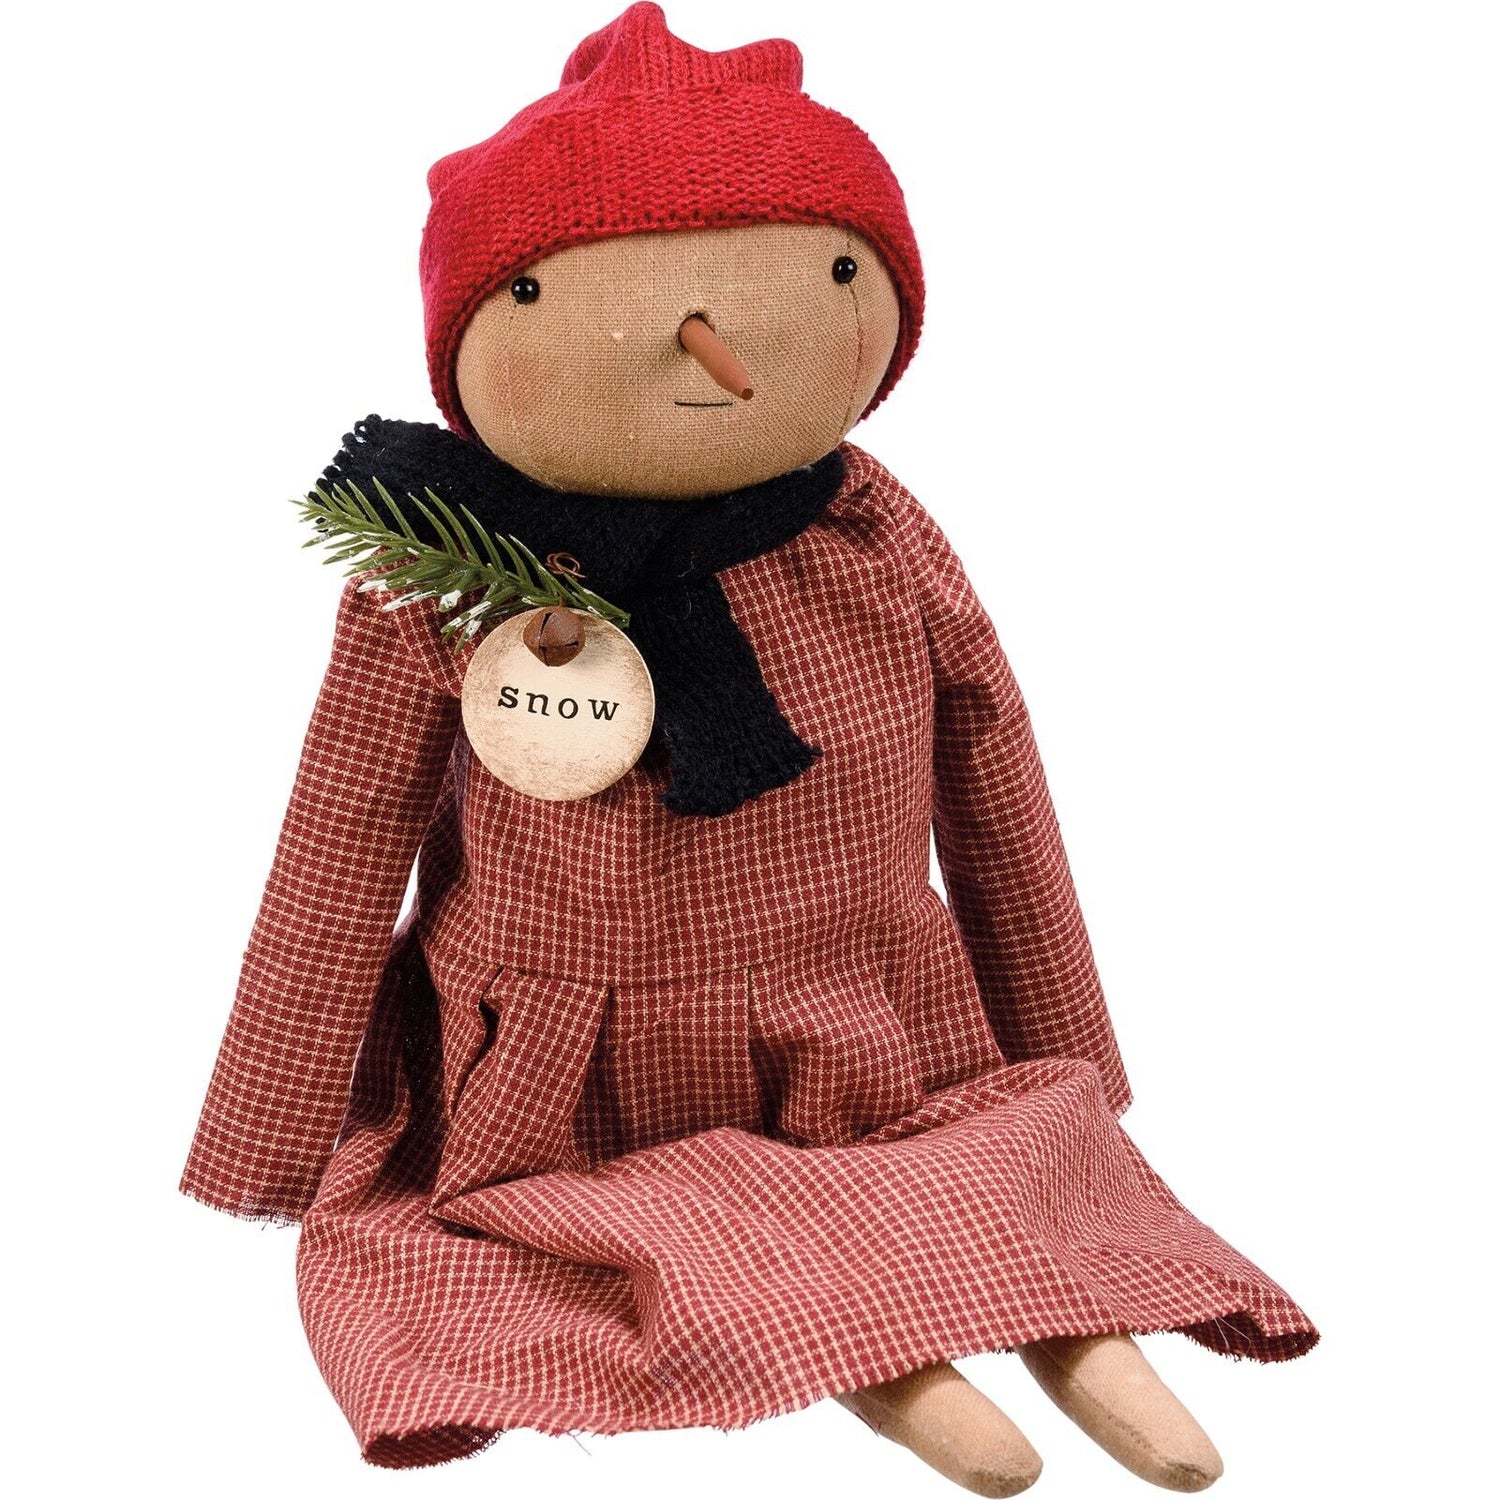 Primitive Country Christma Sierra Snow Girl Doll - The Primitive Pineapple Collection